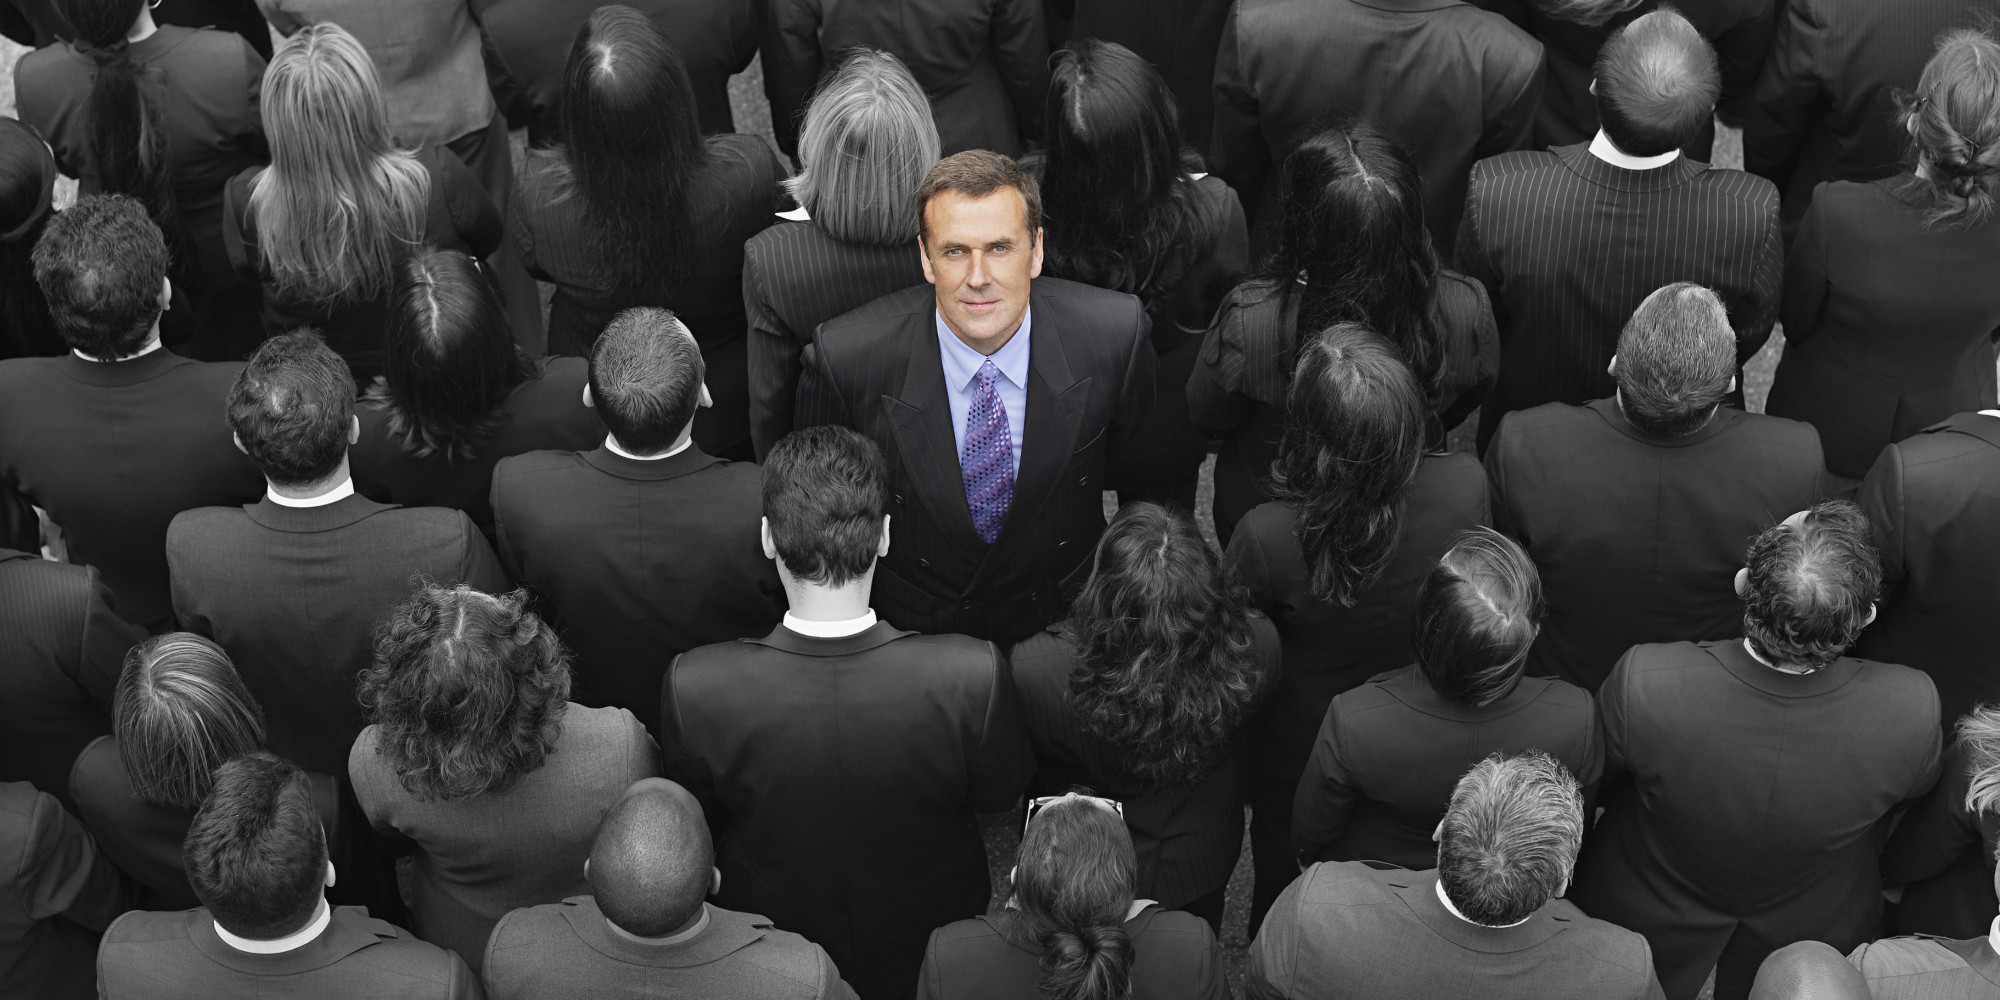 4 Ways to Make Your Business Stand Out Among the Crowd